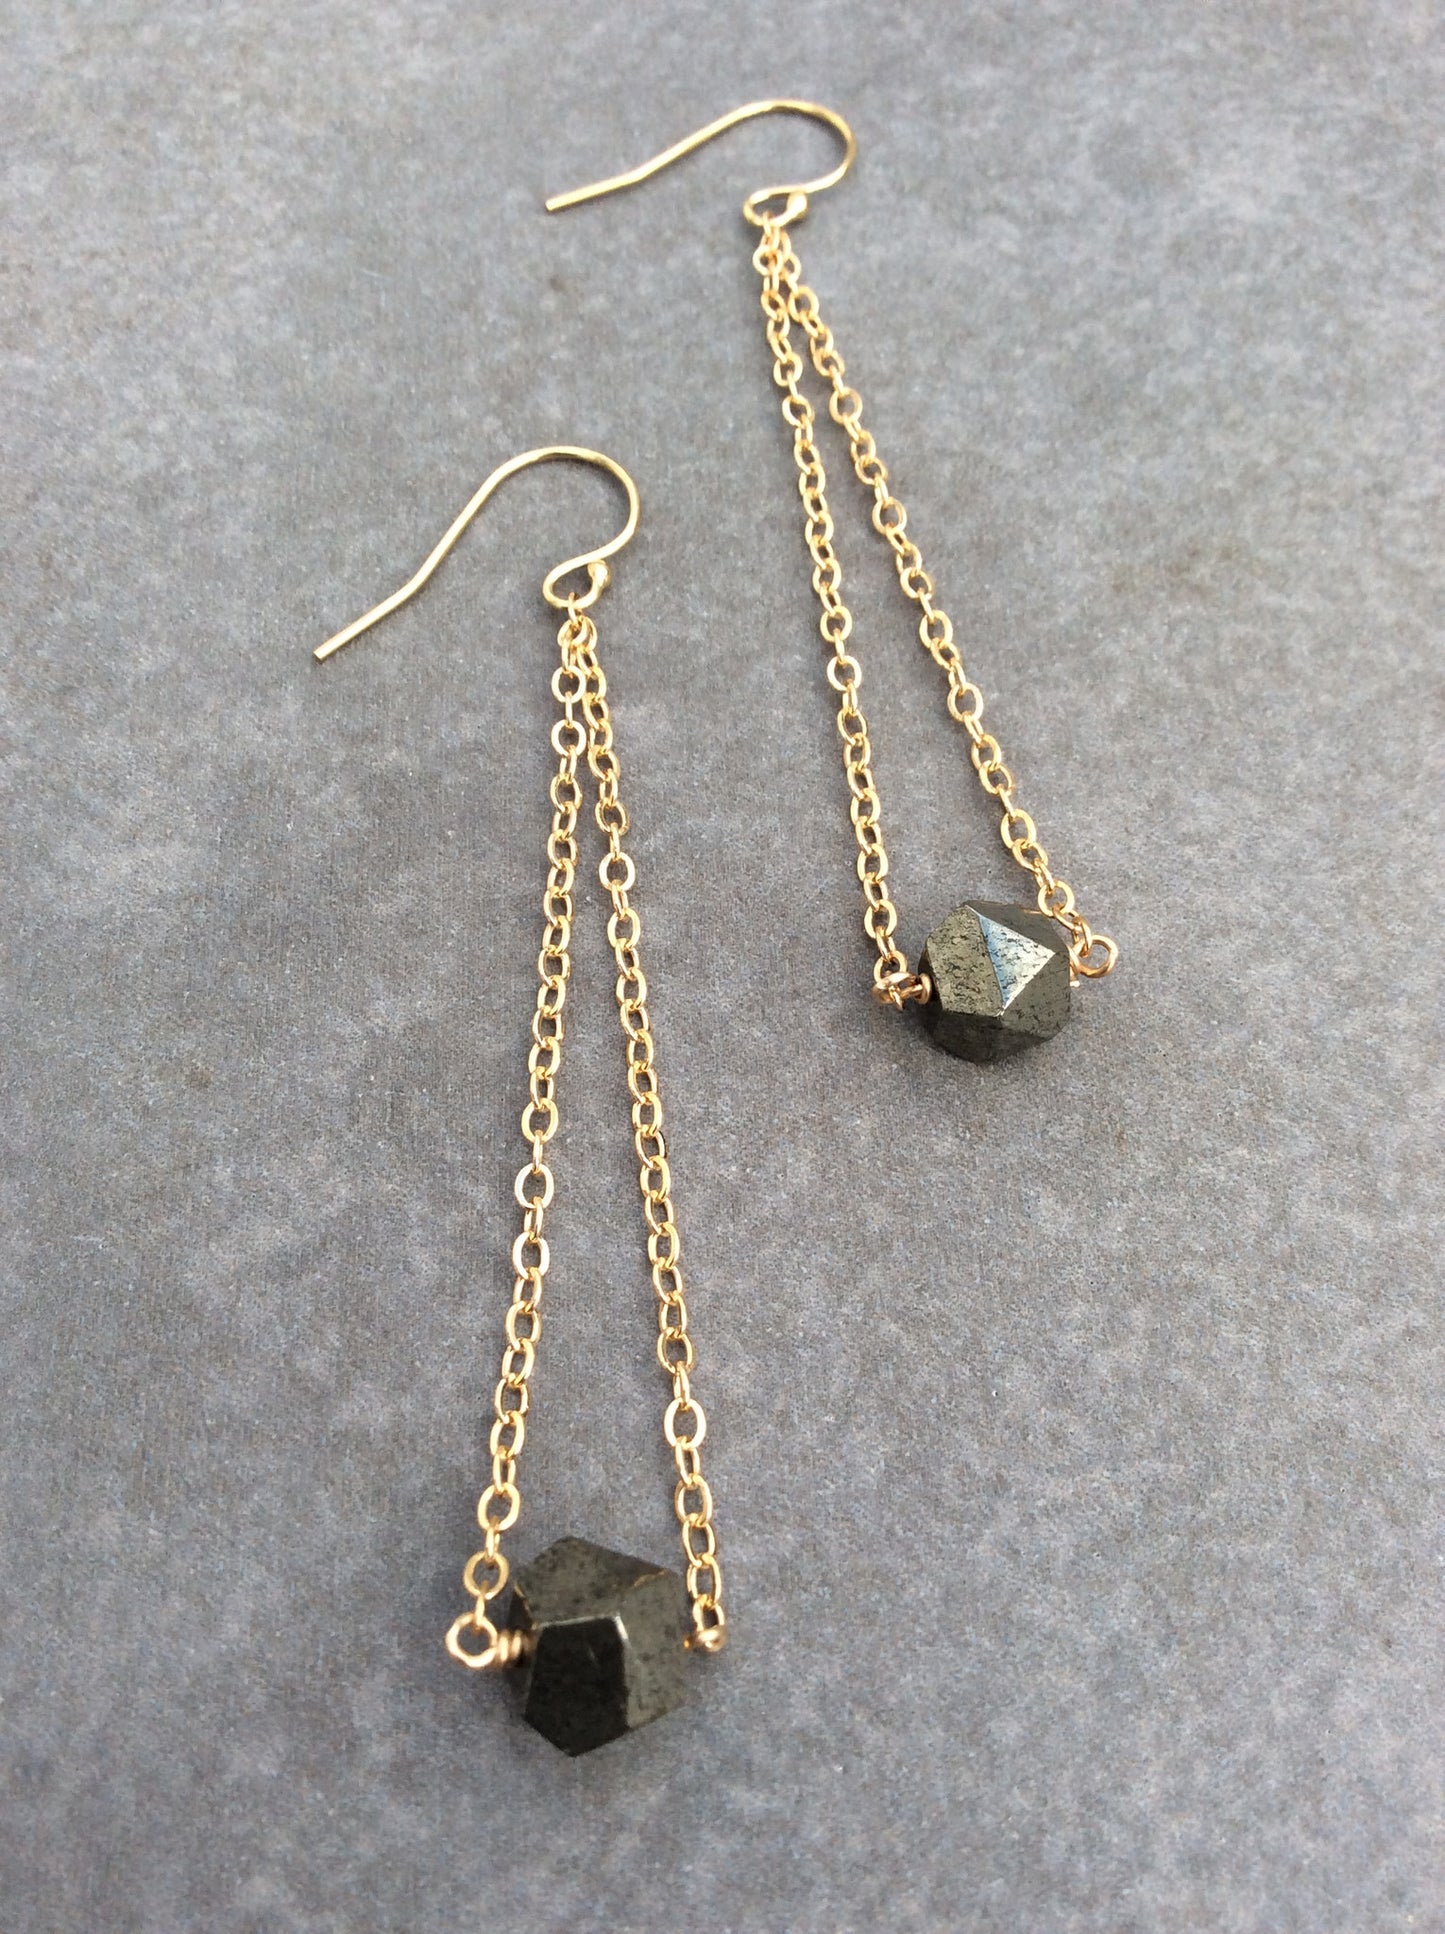 Round Faceted a Pyrite Chandelier Earrings